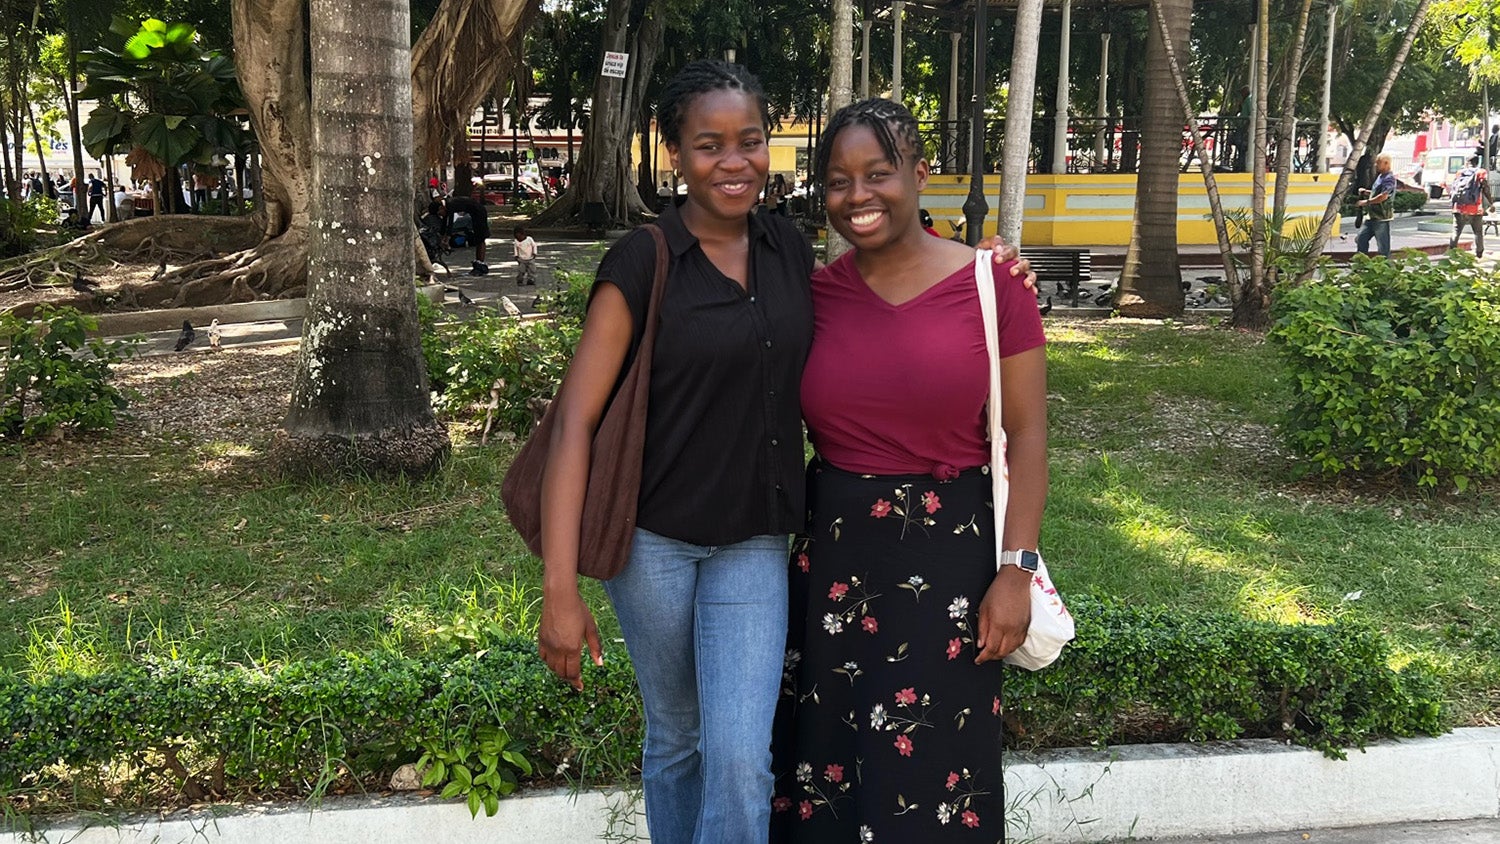 Students Phoebe Ato and Rukewe Kehinde stand next to each other in a parklike setting